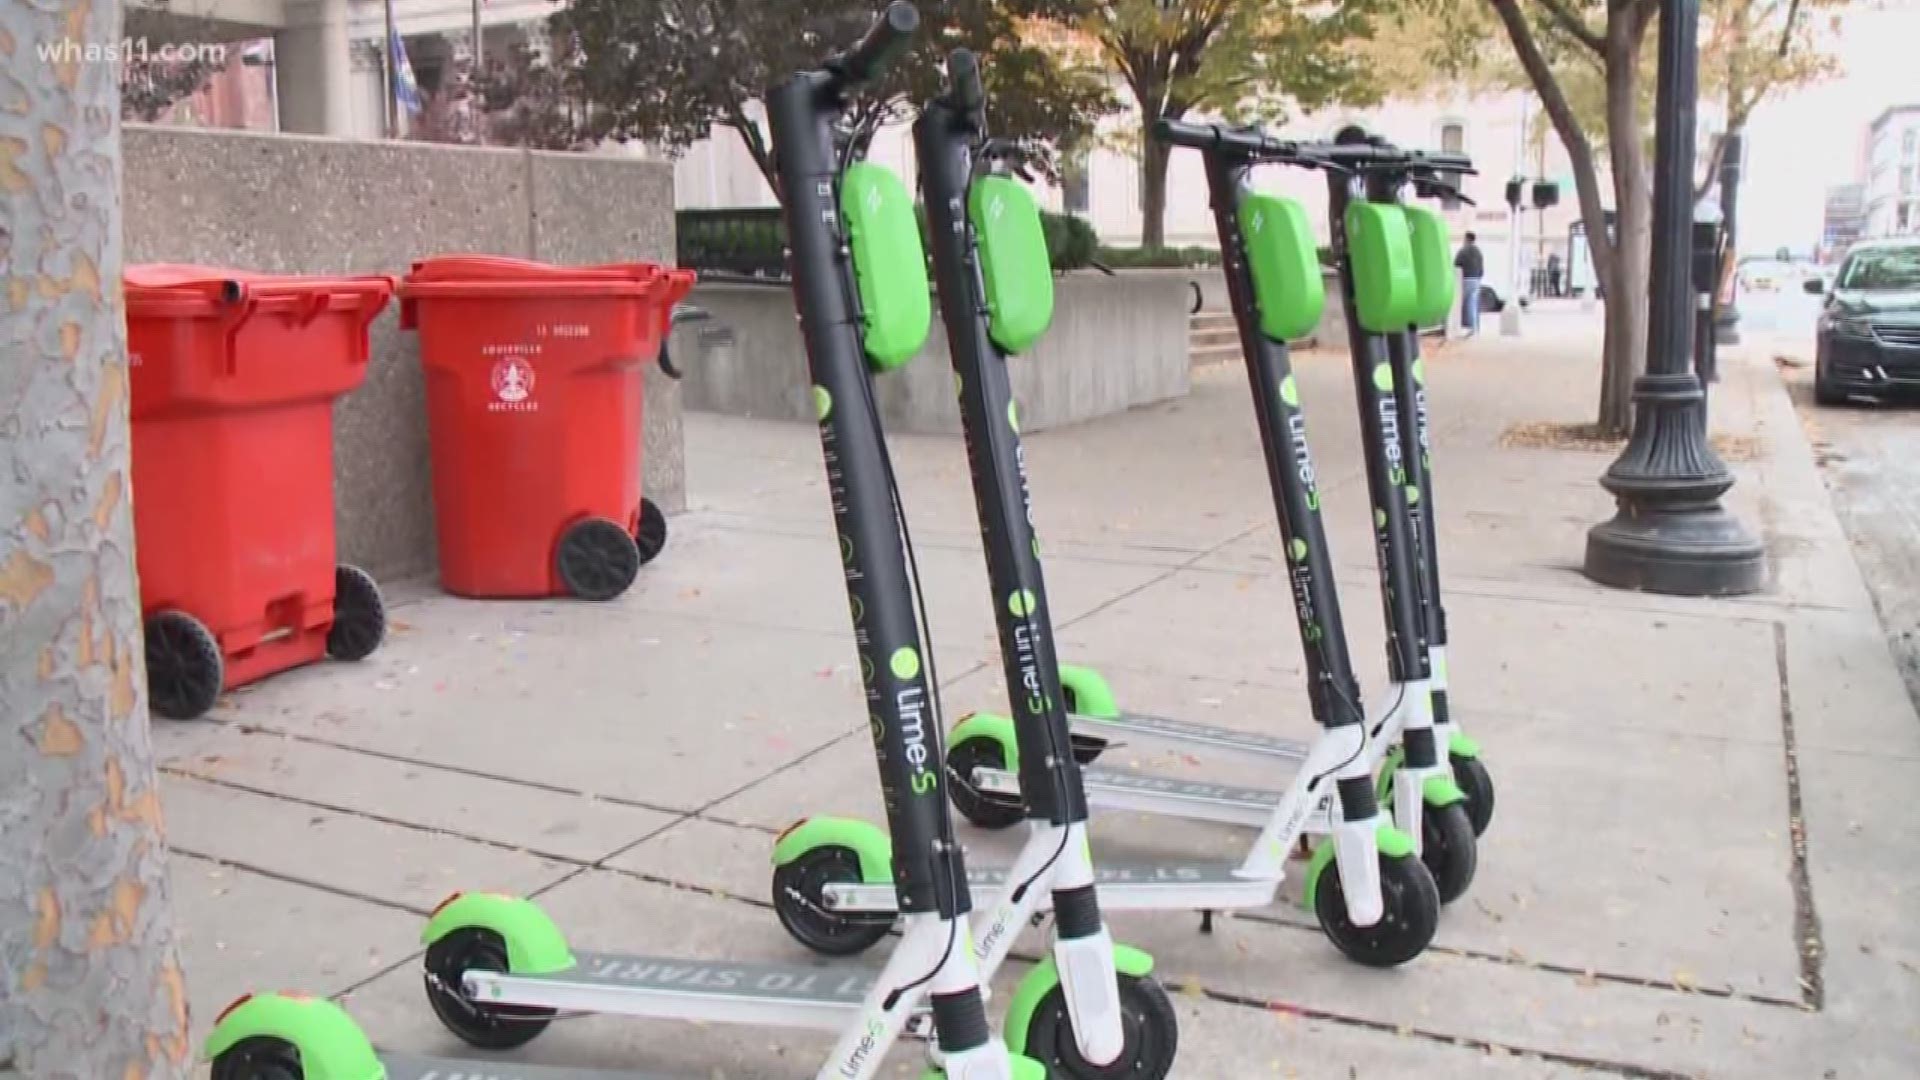 The electric scooter company announces that Louisville residents have traveled more than 250,000 miles since its launch in 2018.